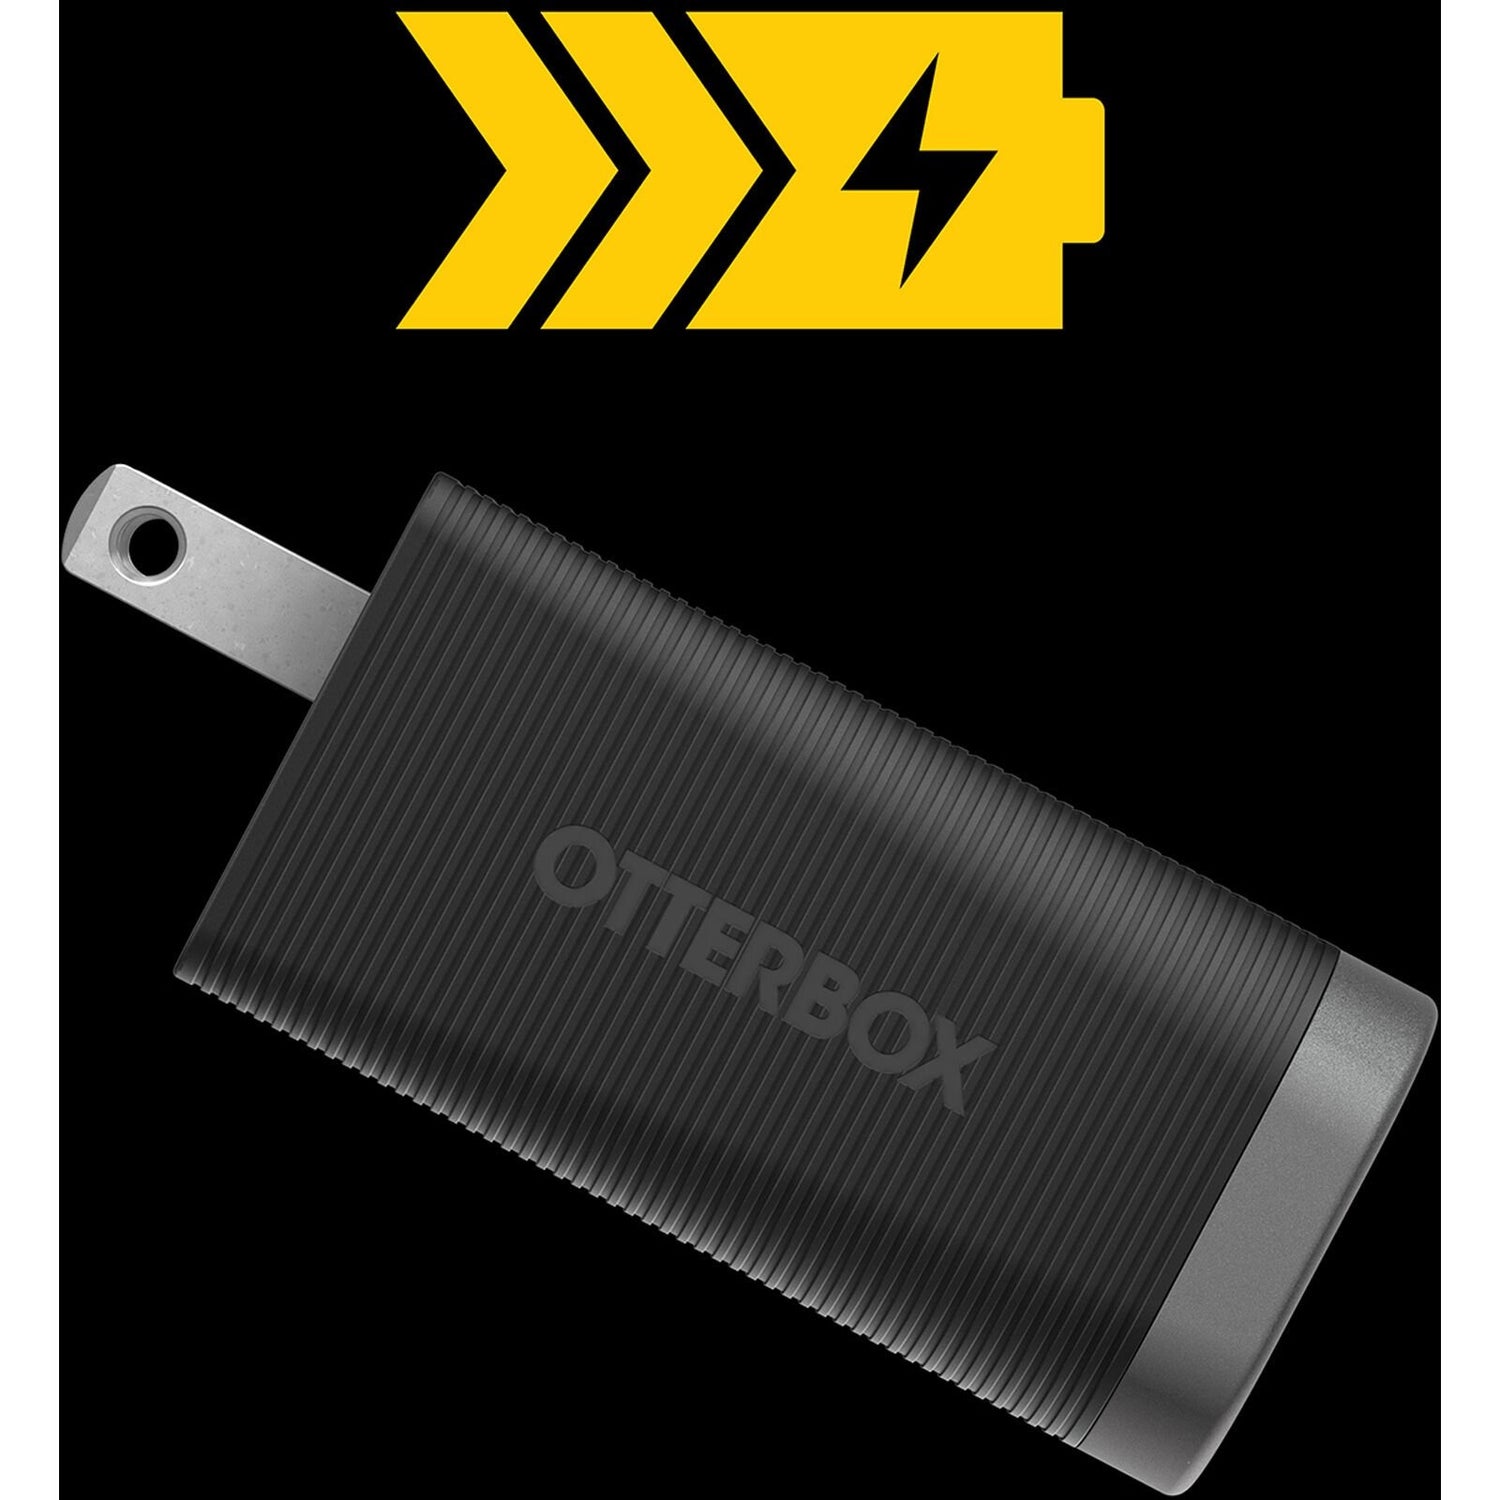 OtterBox Premium Pro Fash Charge 72W USB-C Wall Charger - Nightshade (New)